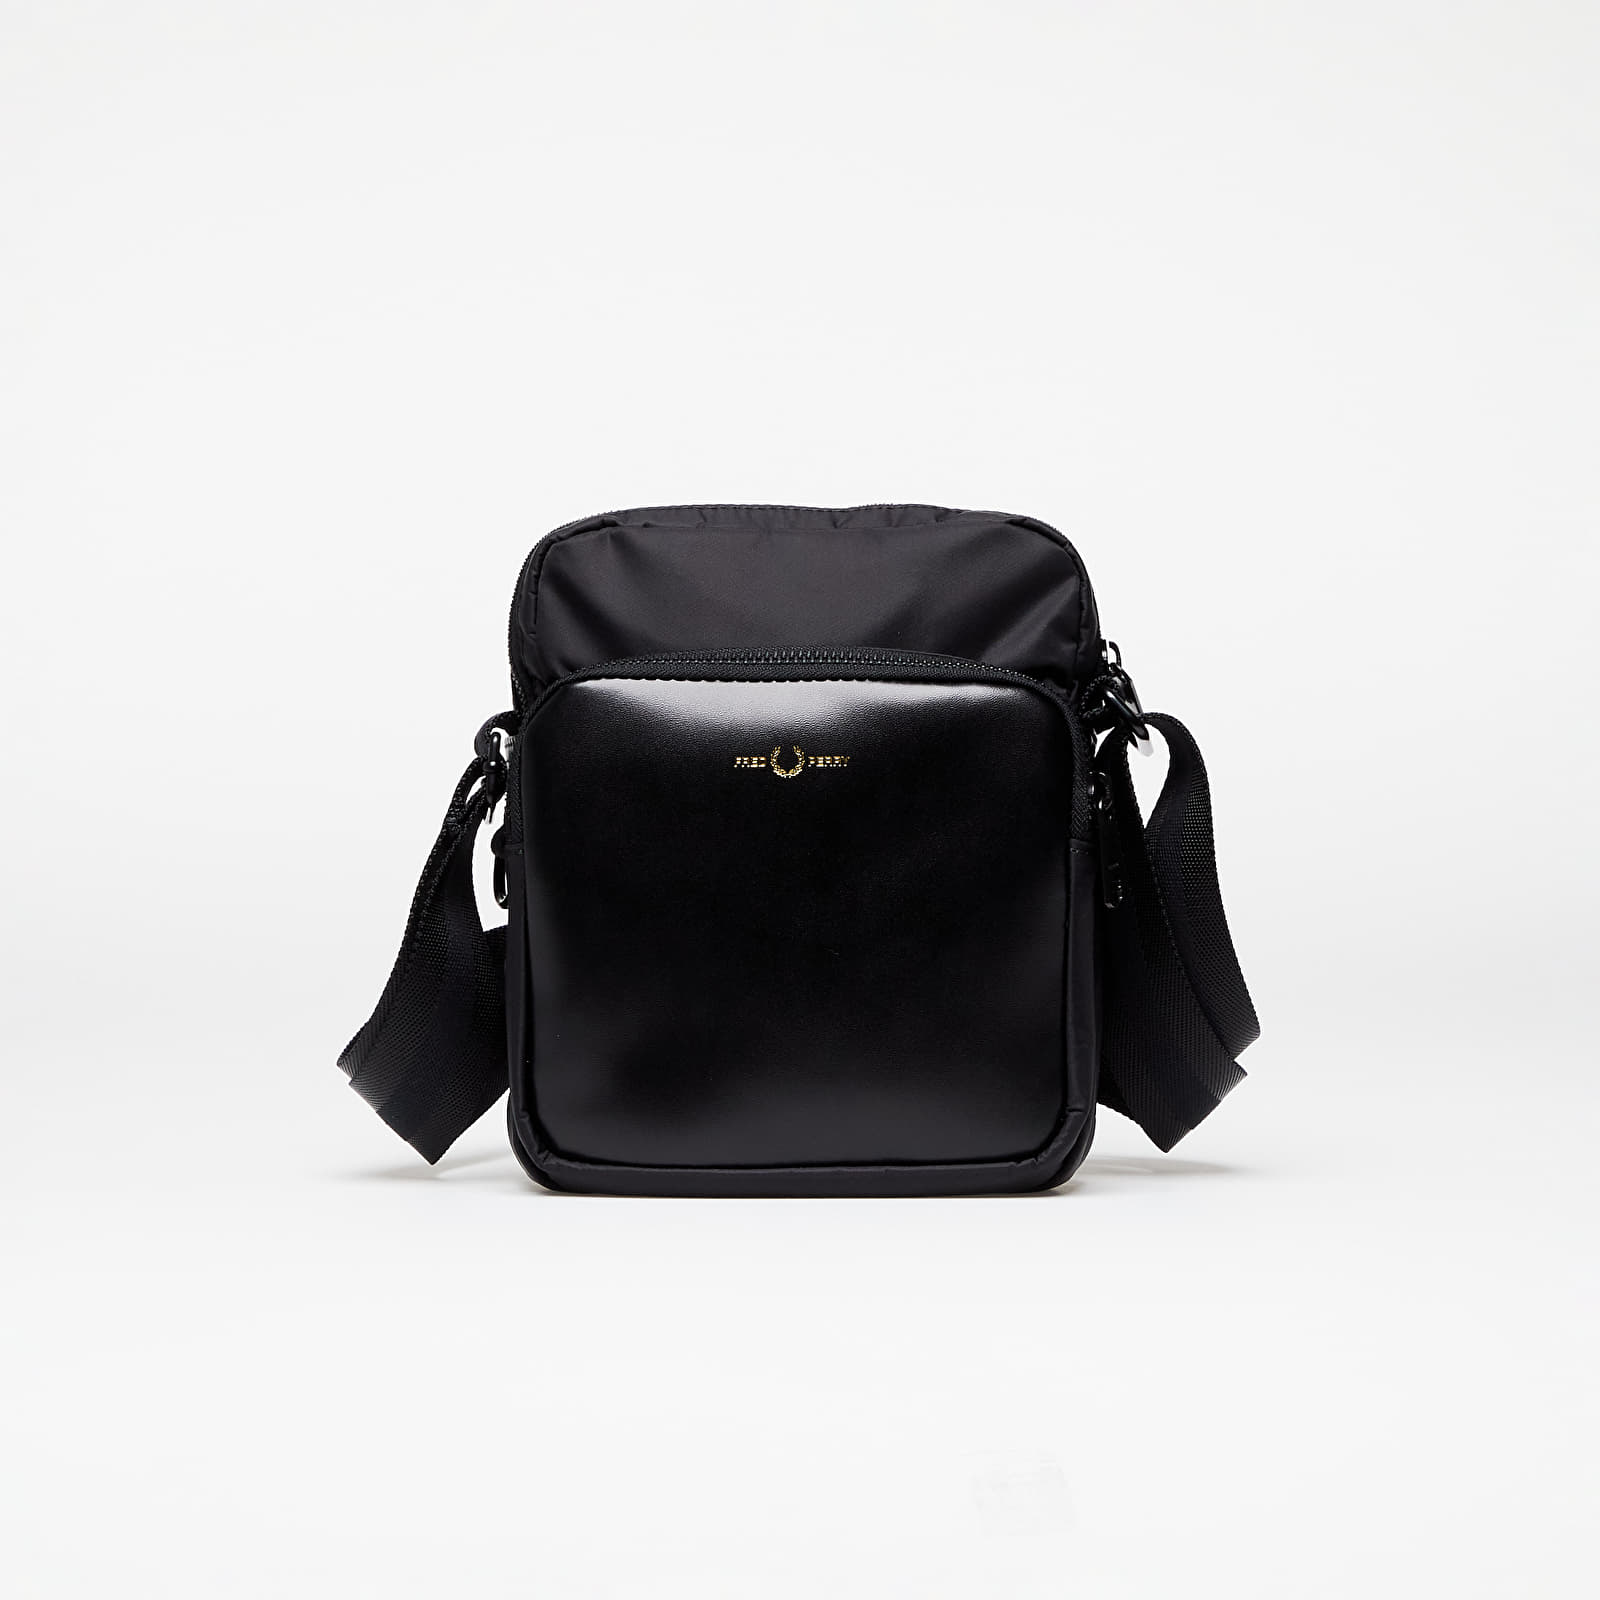 FRED PERRY Nylon Twill Leather Side Bag